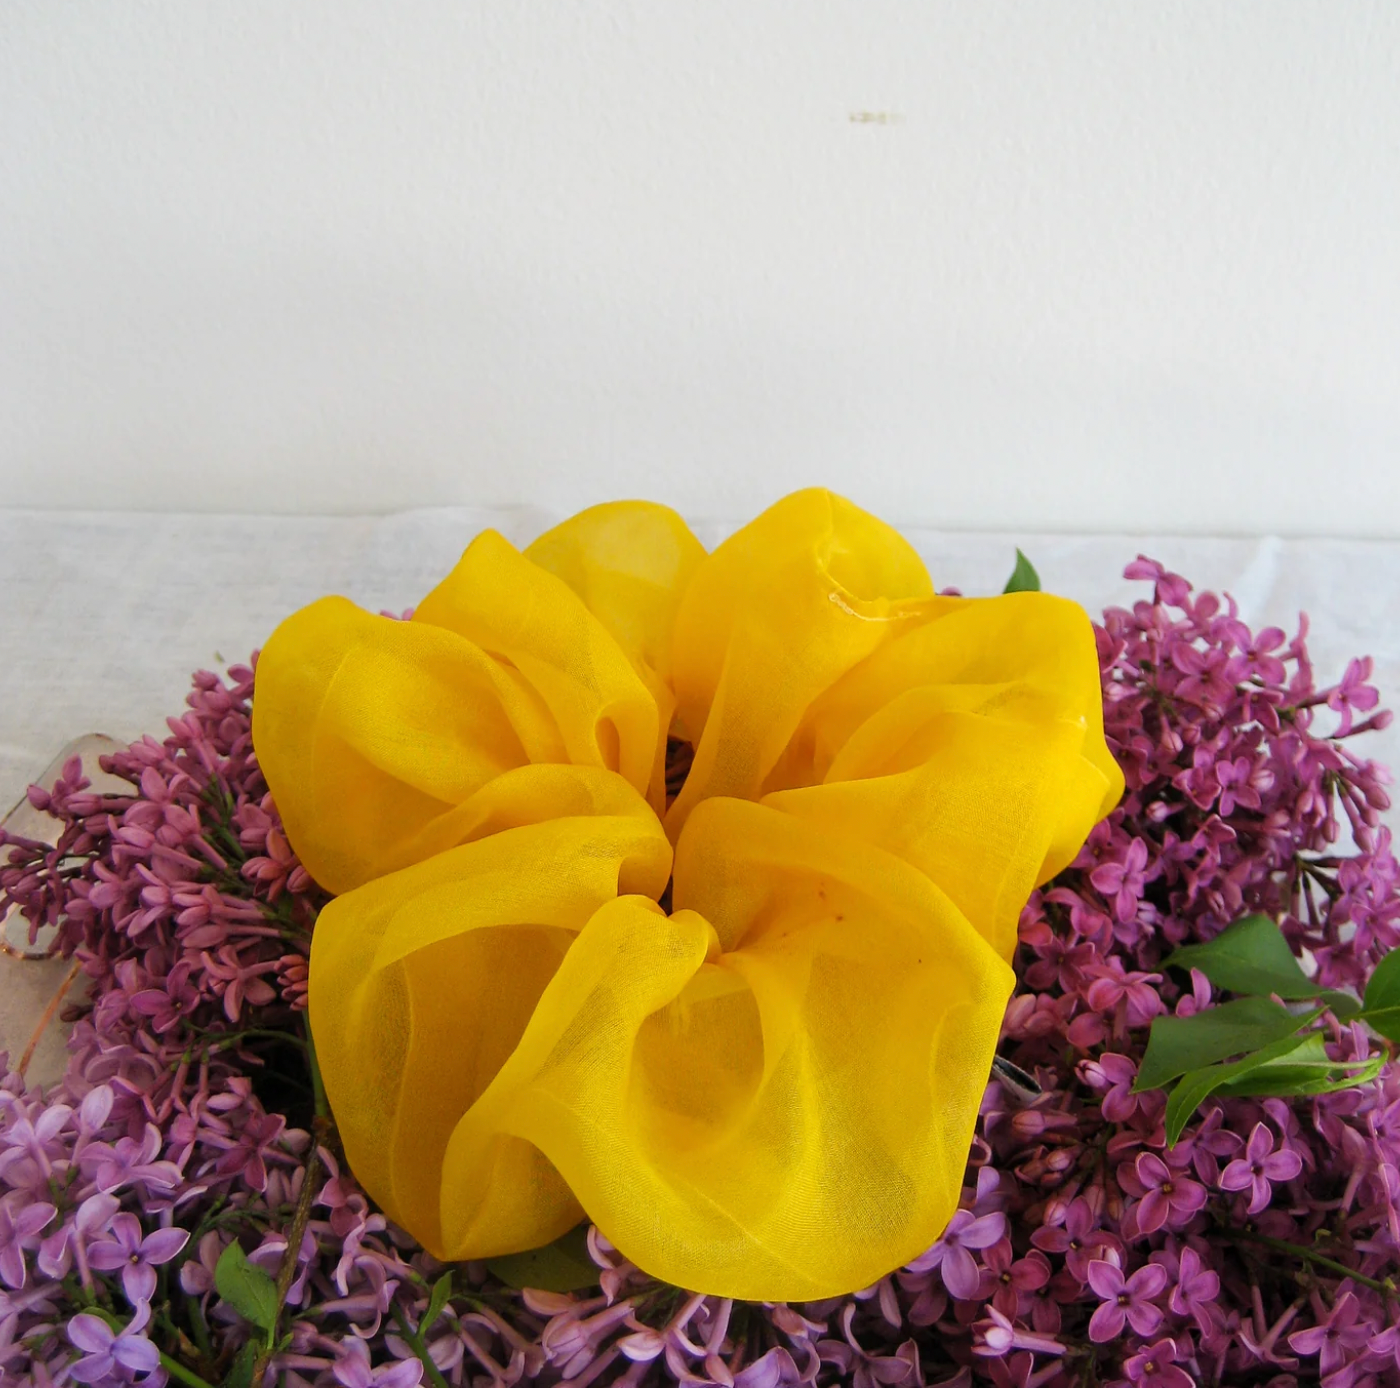 Product Image for Silk Organza Scrunchie, Marigold